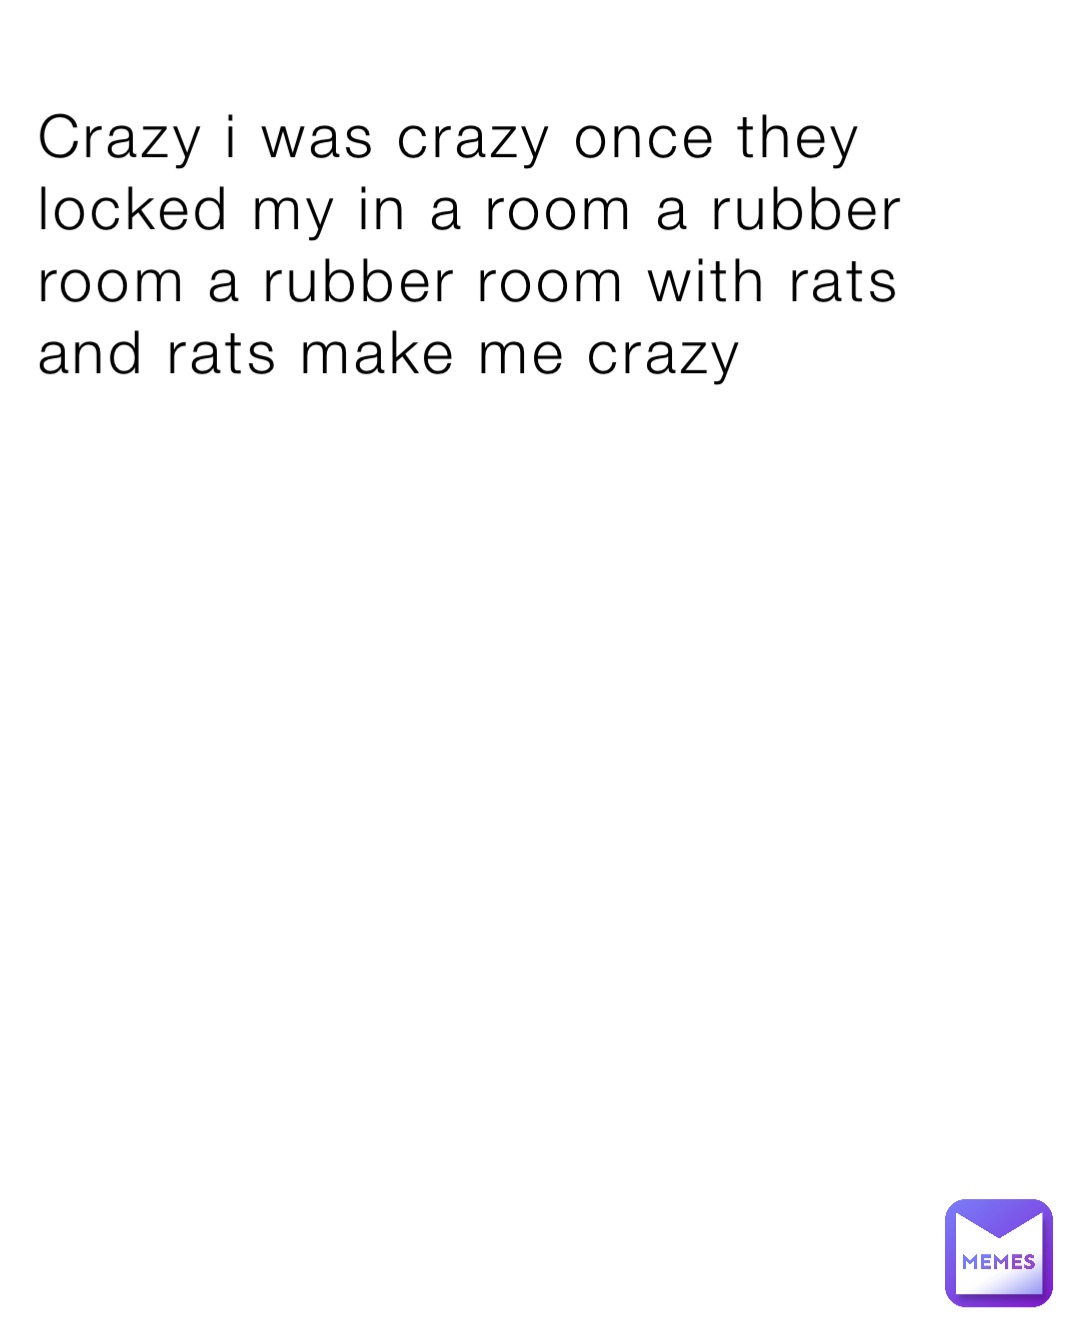 Crazy i was crazy once they locked my in a room a rubber room a rubber room with rats and rats make me crazy